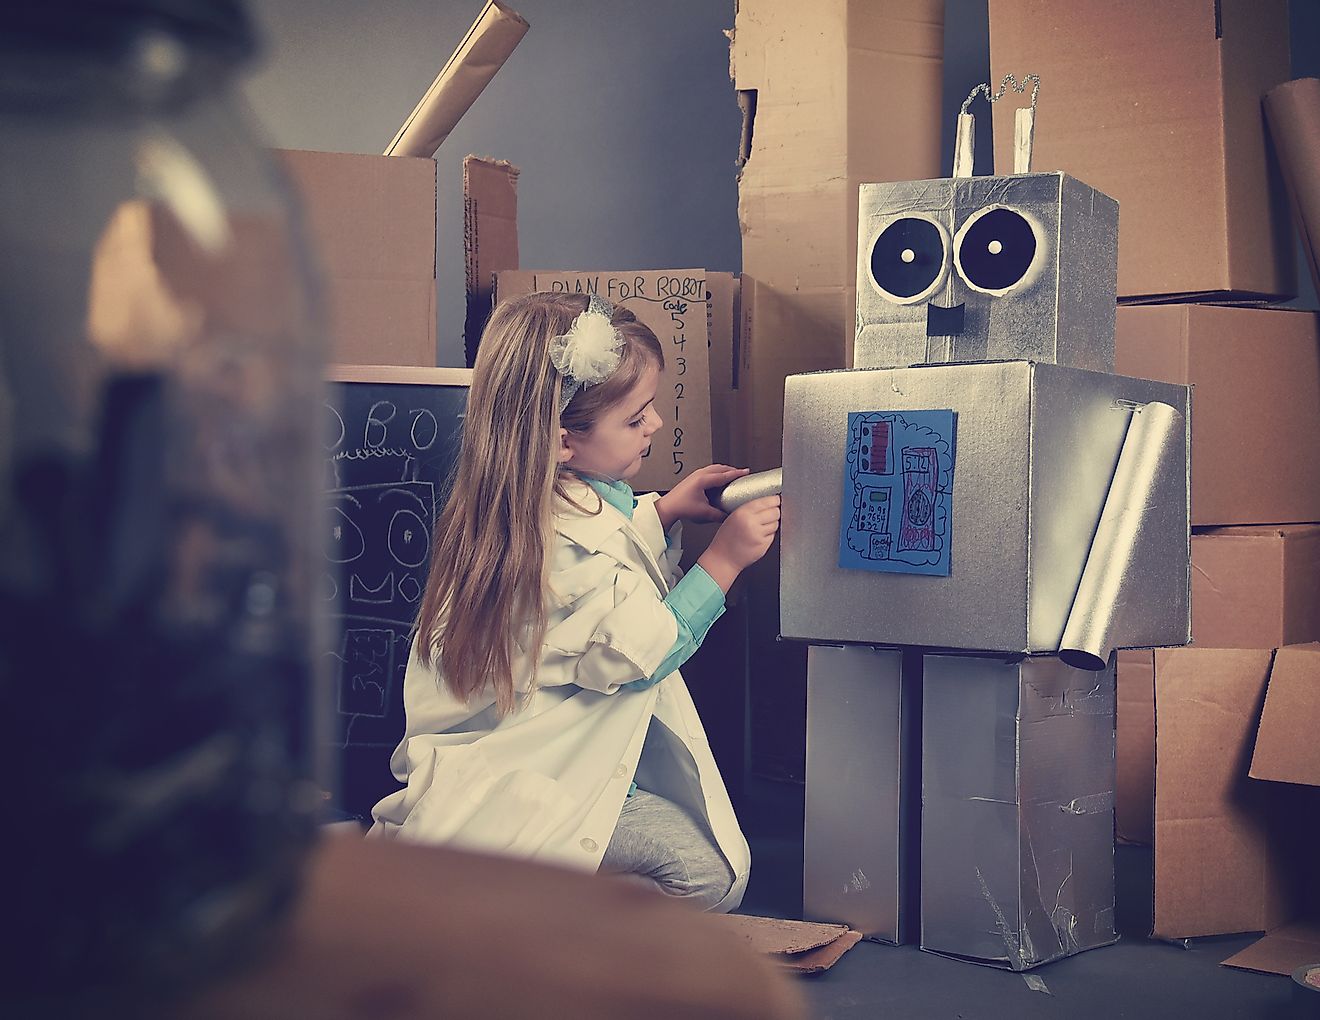 A science student is inventing a metal robot out of cardboard boxes with tools.